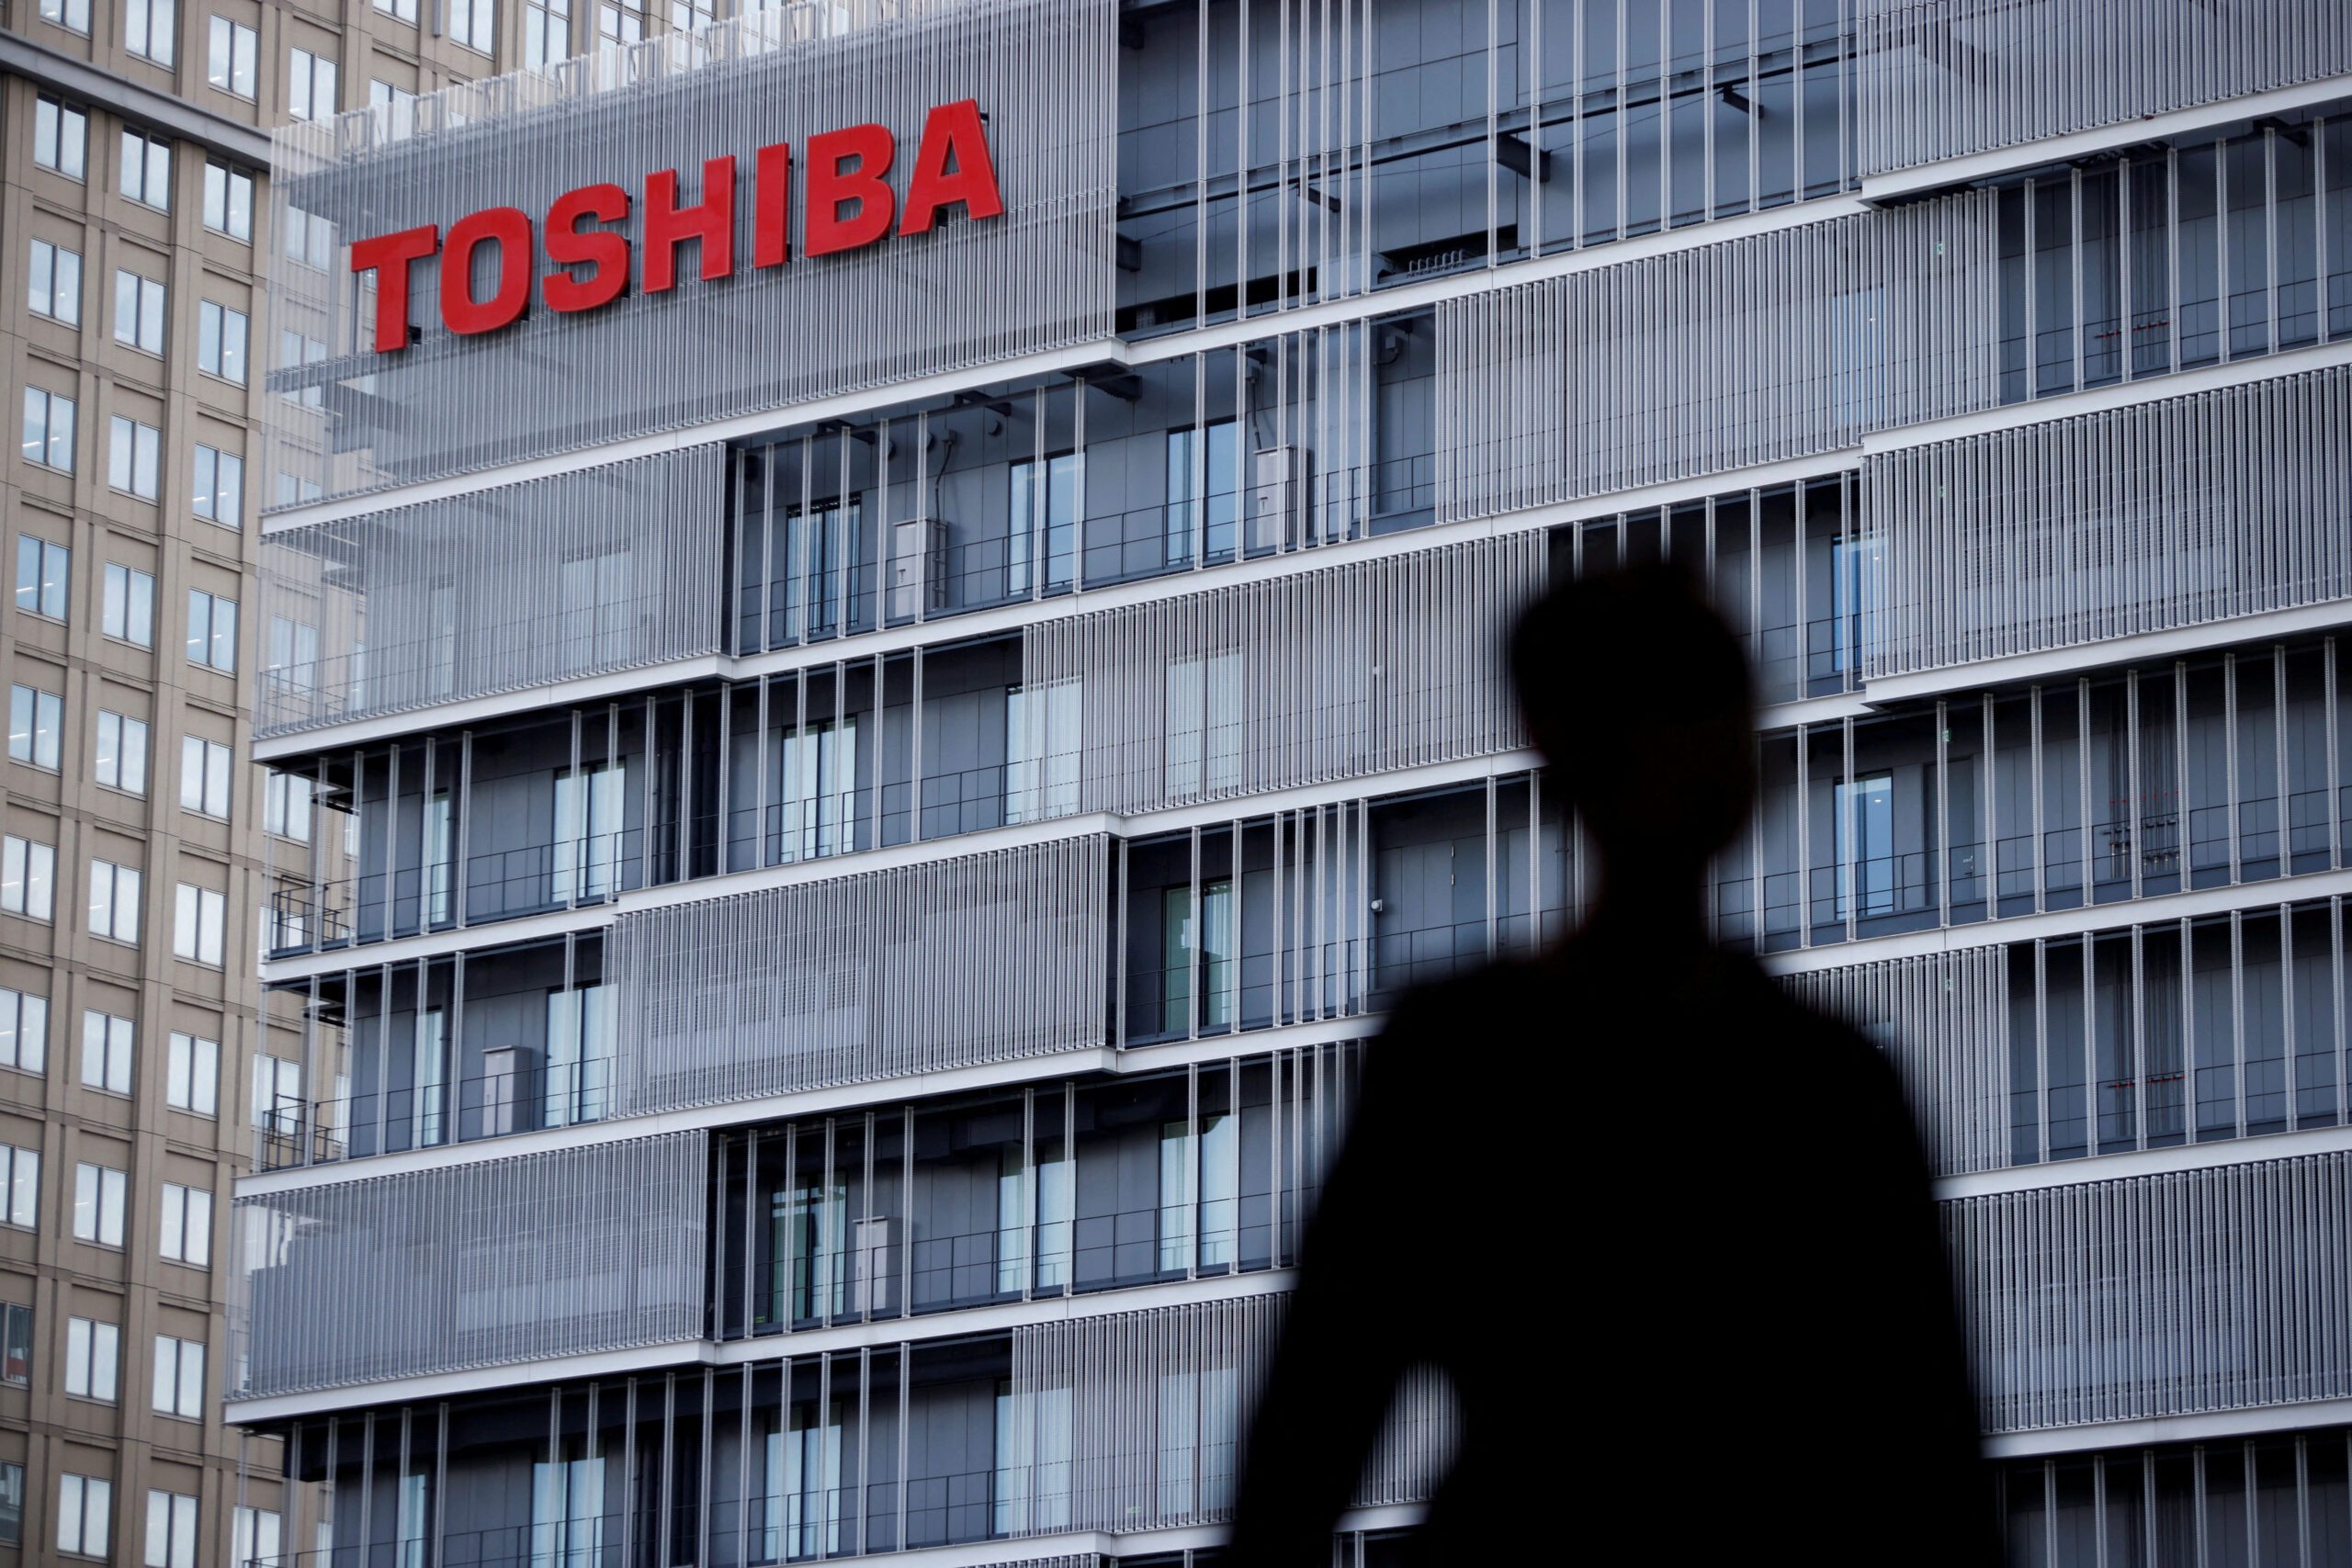 Little-known Japanese PE firm JIP faces tough task of turning around Toshiba